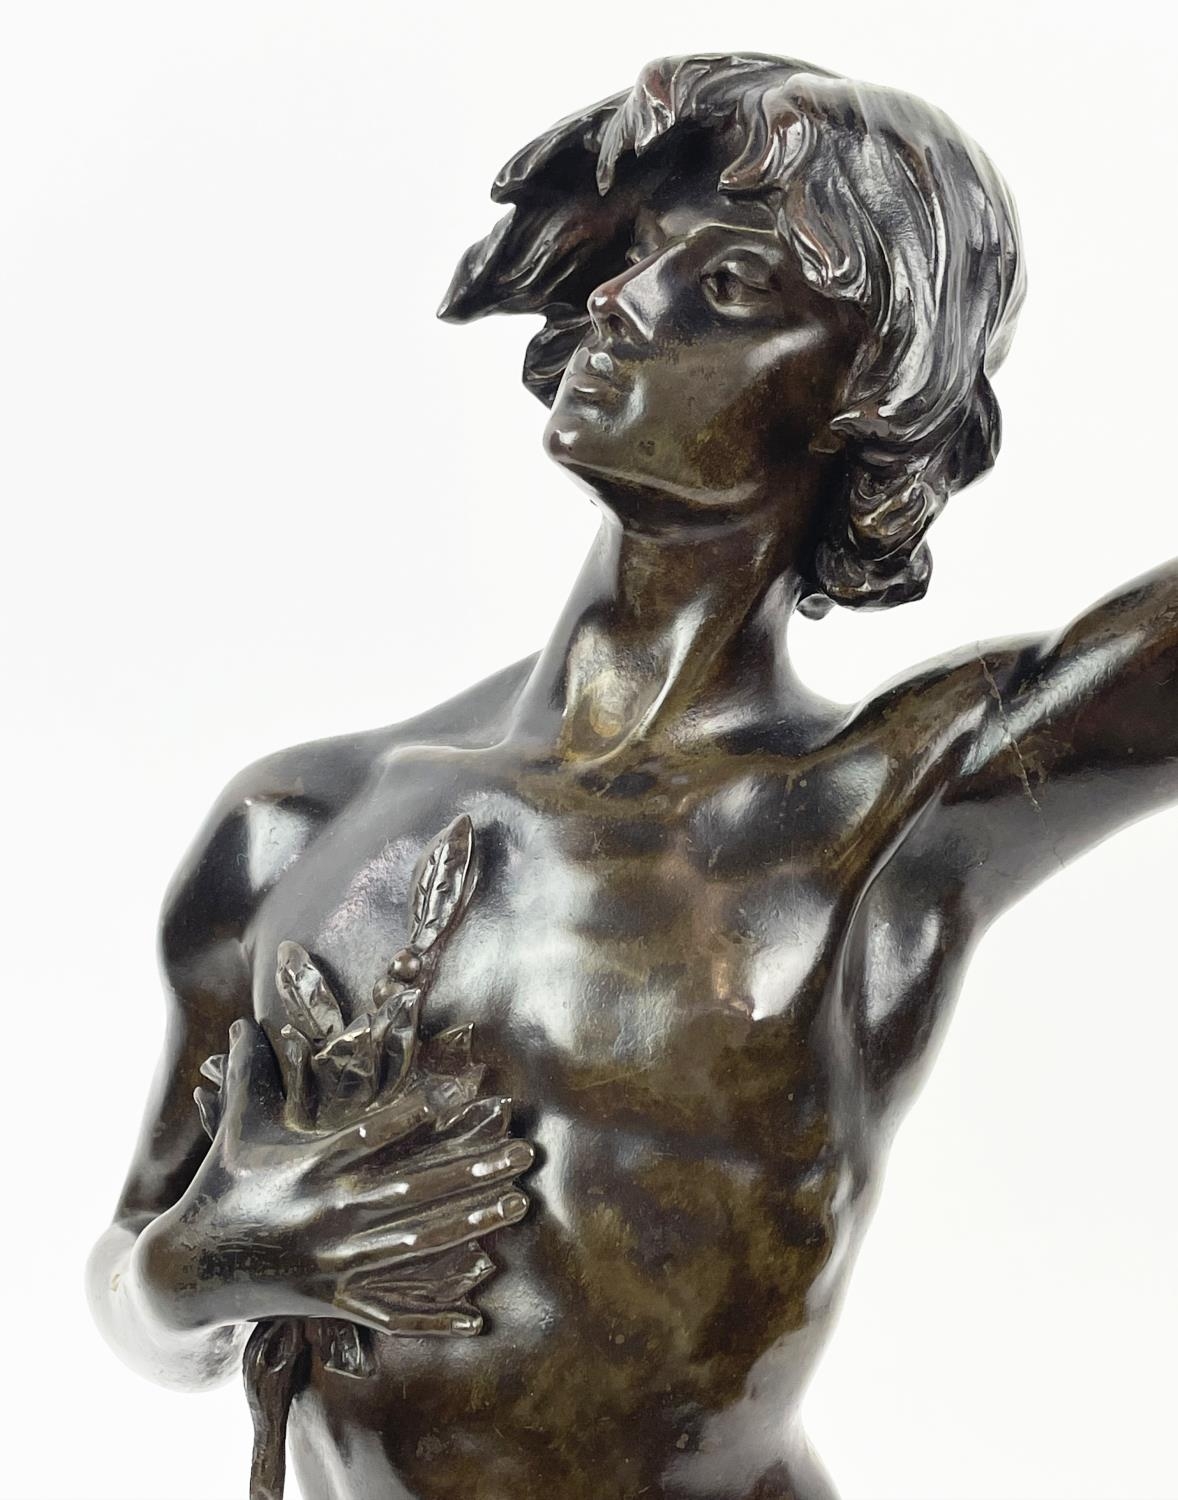 BRONZE FIGURE, ANGLES CANE (1859-1911), 'Premier triumphe', mounted on a rouge marble plinth base, - Image 8 of 8